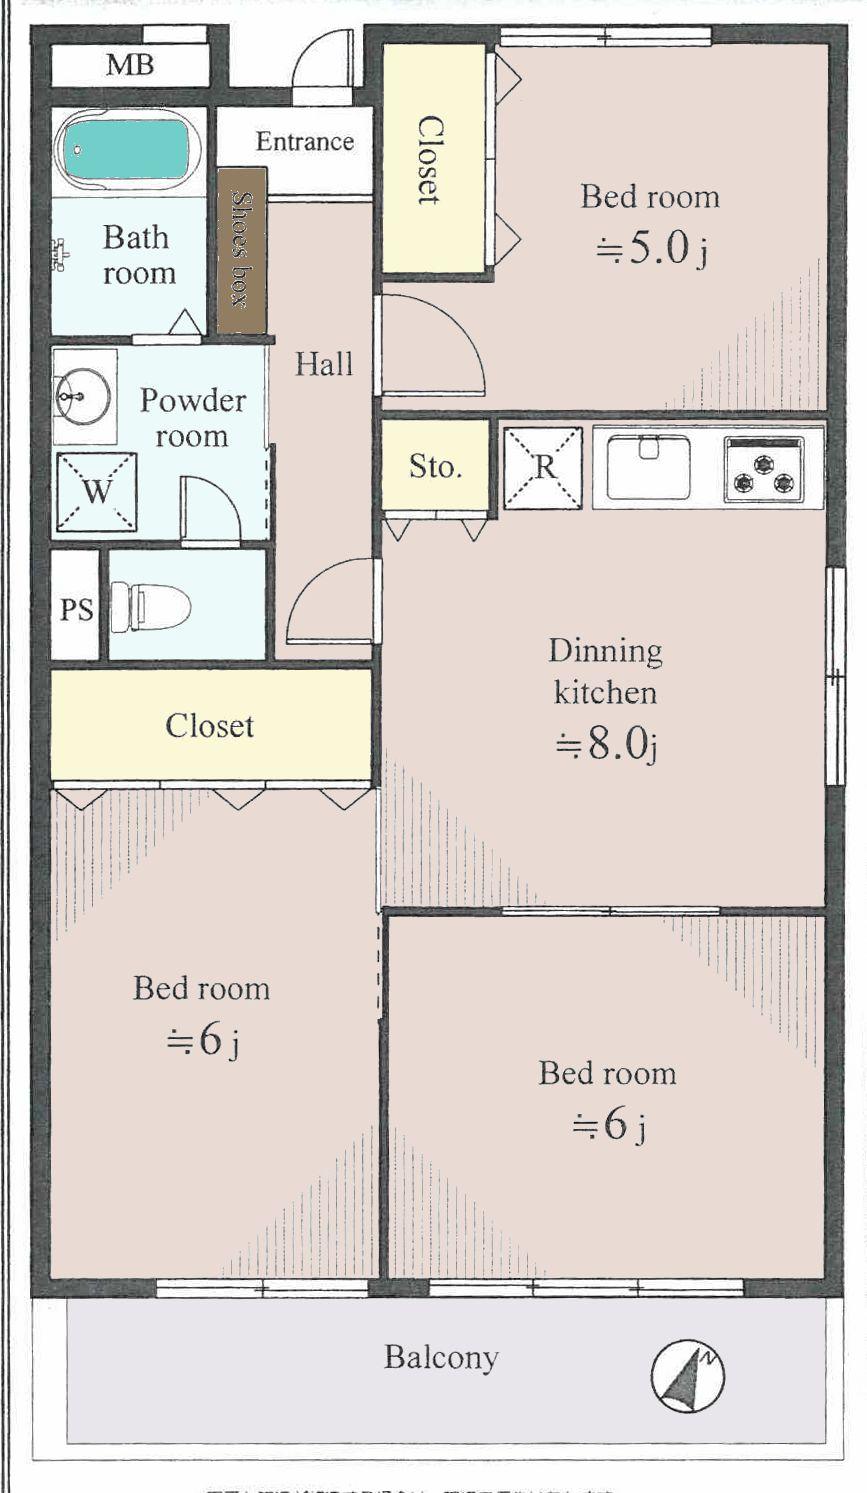 Floor plan. 3DK, Price 12.8 million yen, Occupied area 54.61 sq m , Balcony area 4.86 sq m 5 line 4 stops available! New quake-resistance standards Mansion